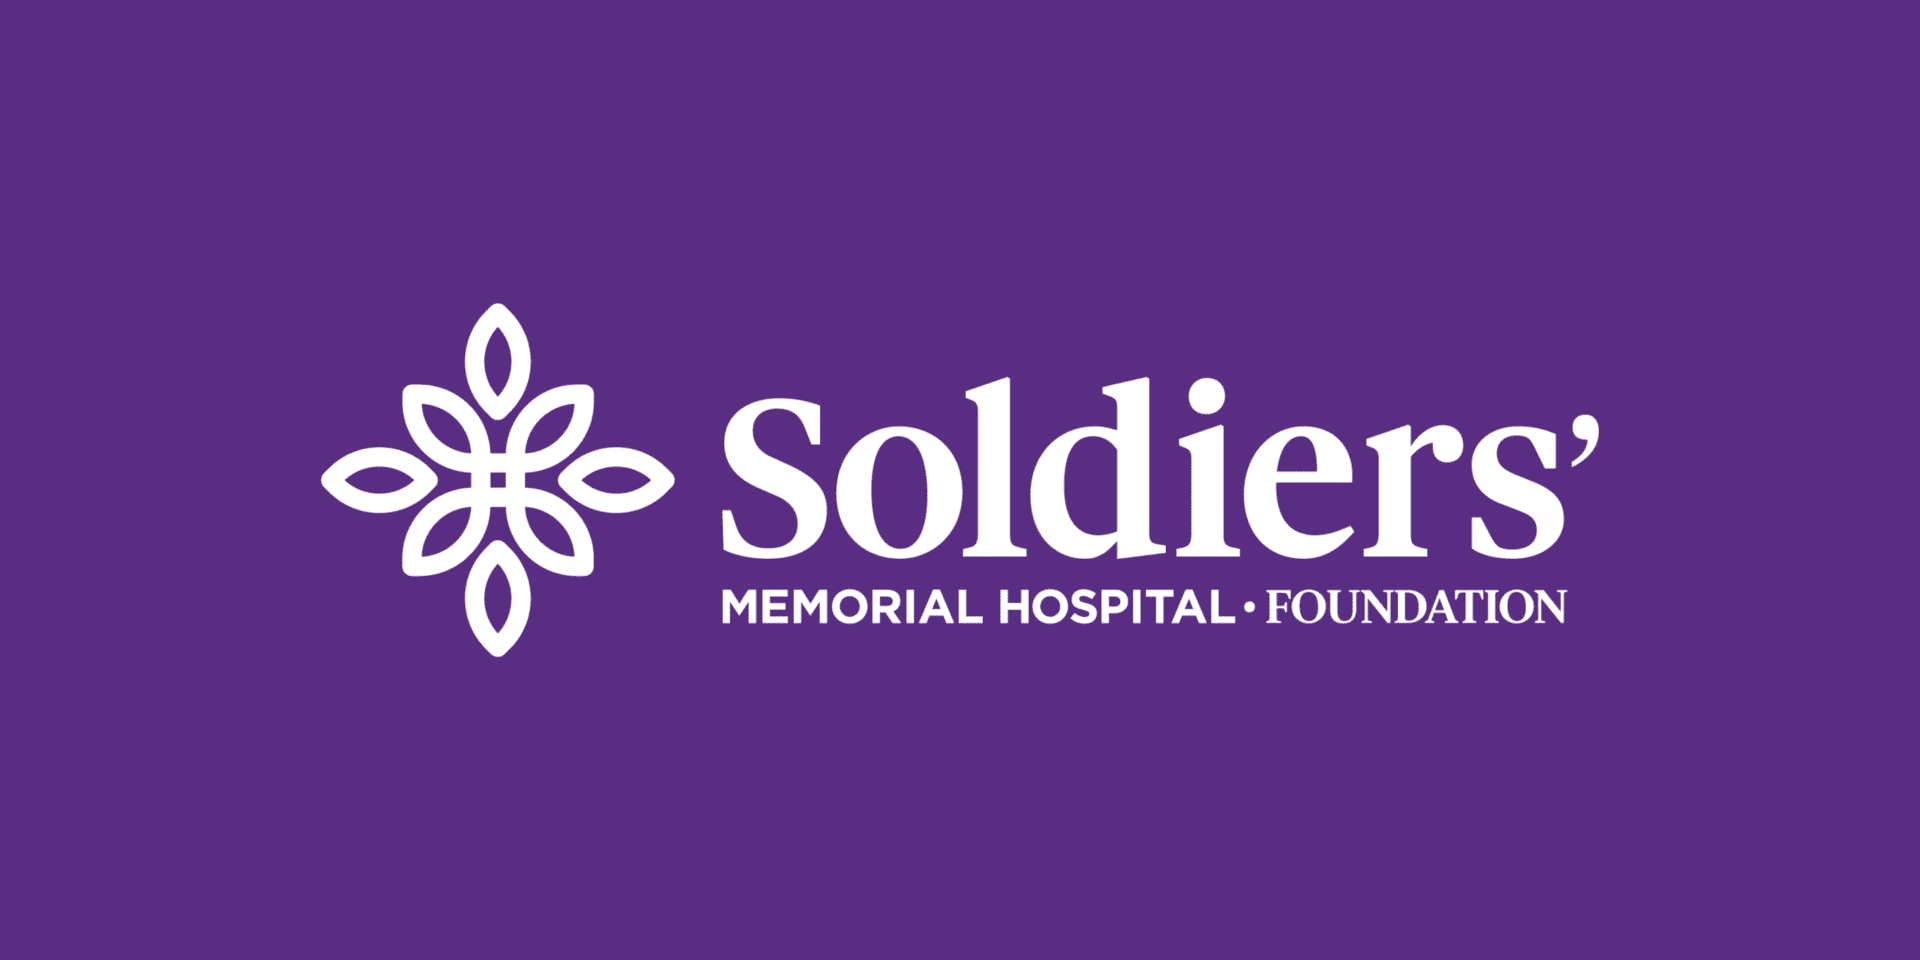 Cancer Care - Soldiers' Memorial Hospital